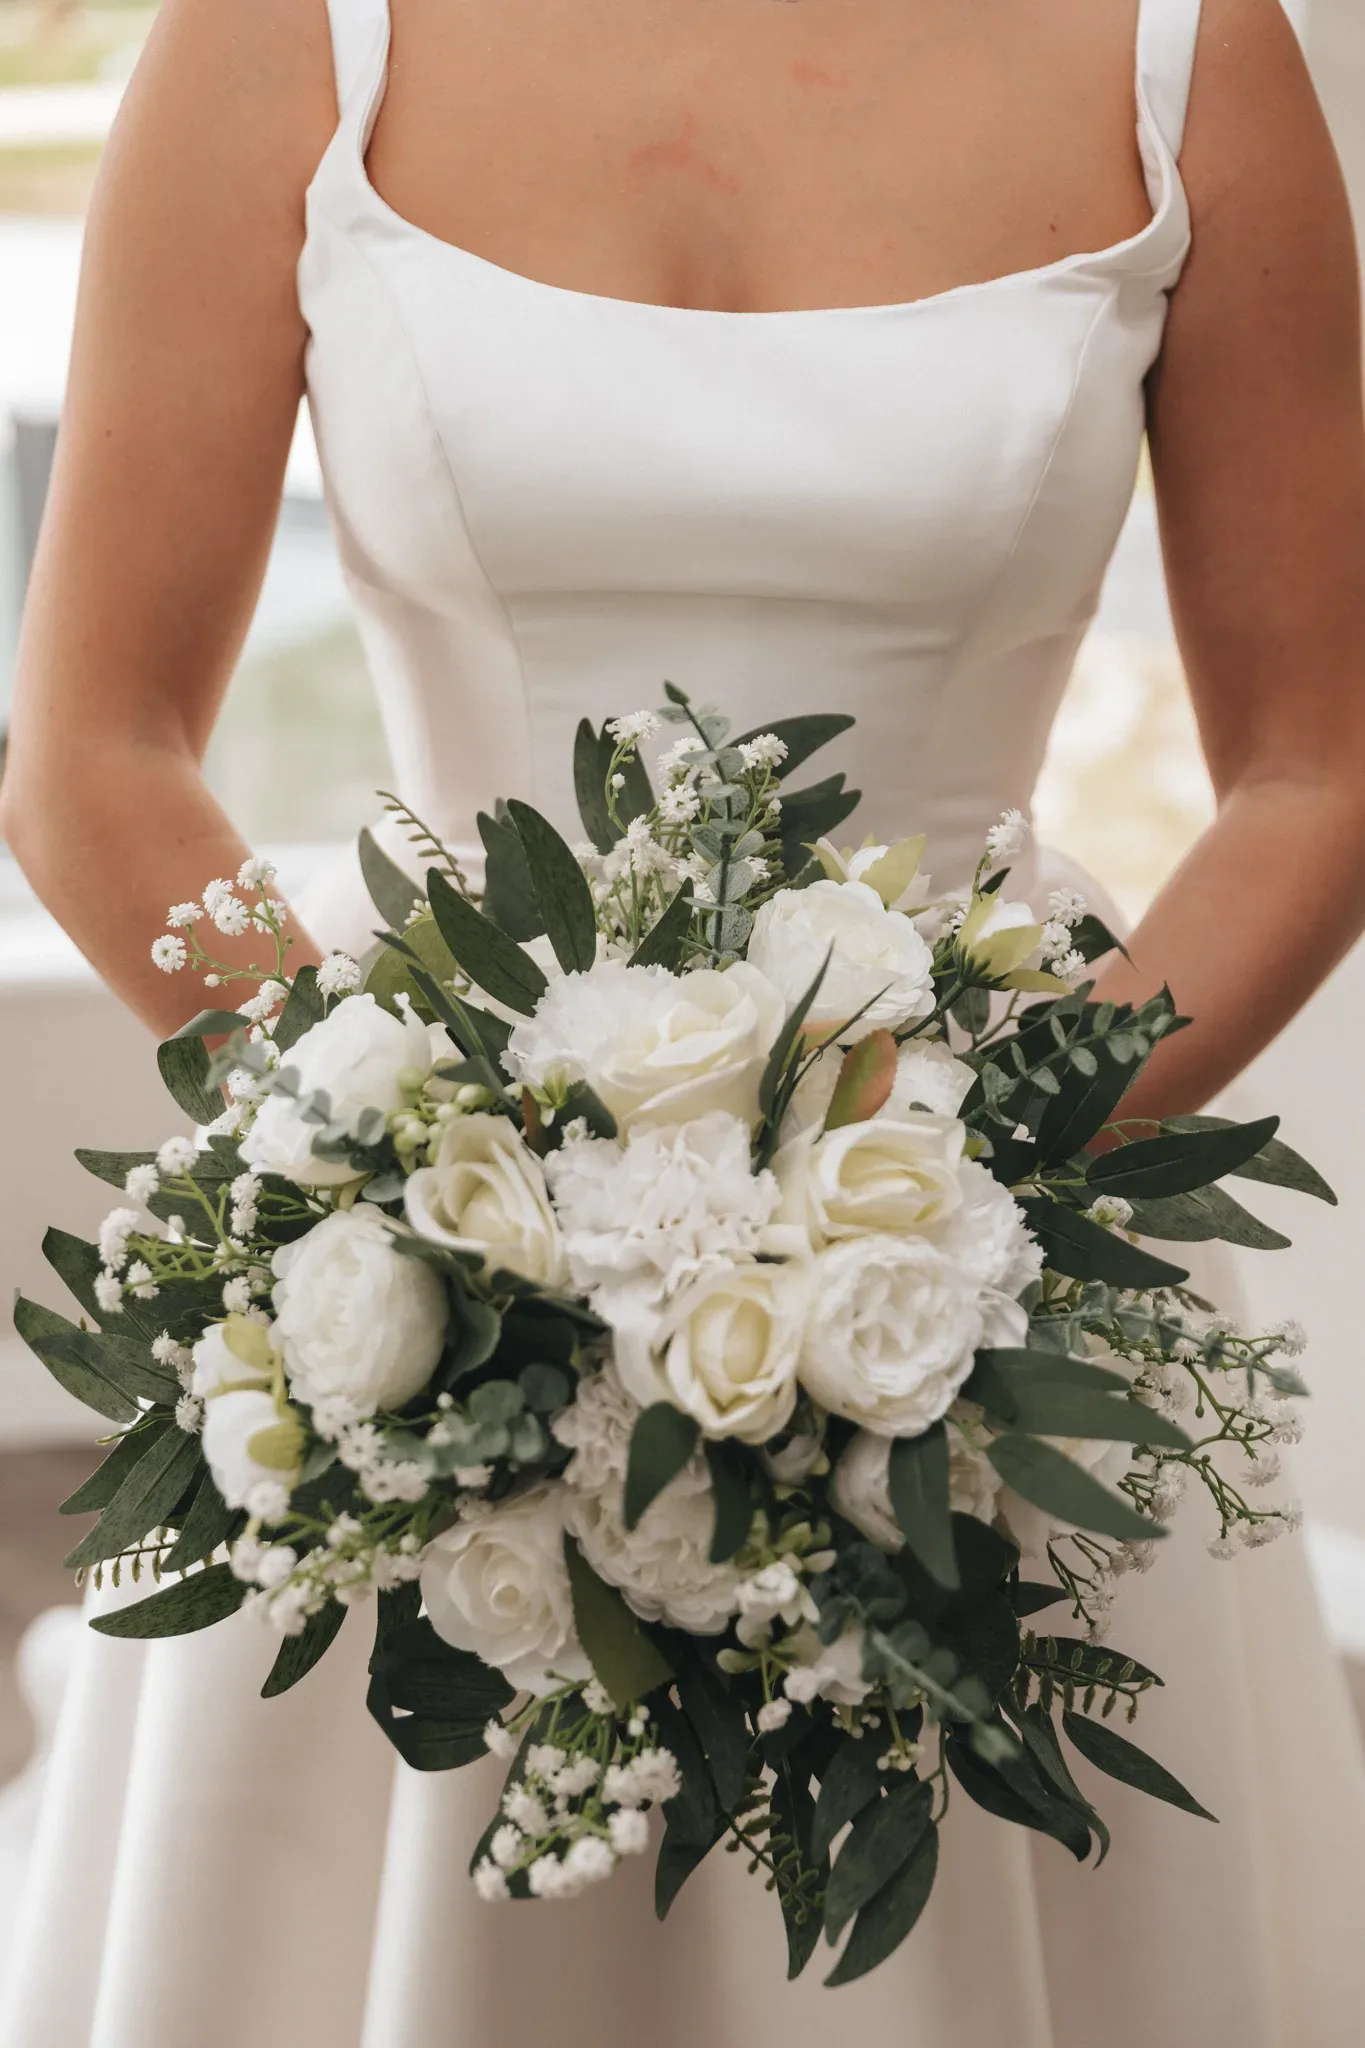 A bride in a white sleeveless dress holds a large bouquet of white roses and green foliage, showcasing the elegant simplicity of her attire and the delicate floral arrangement.